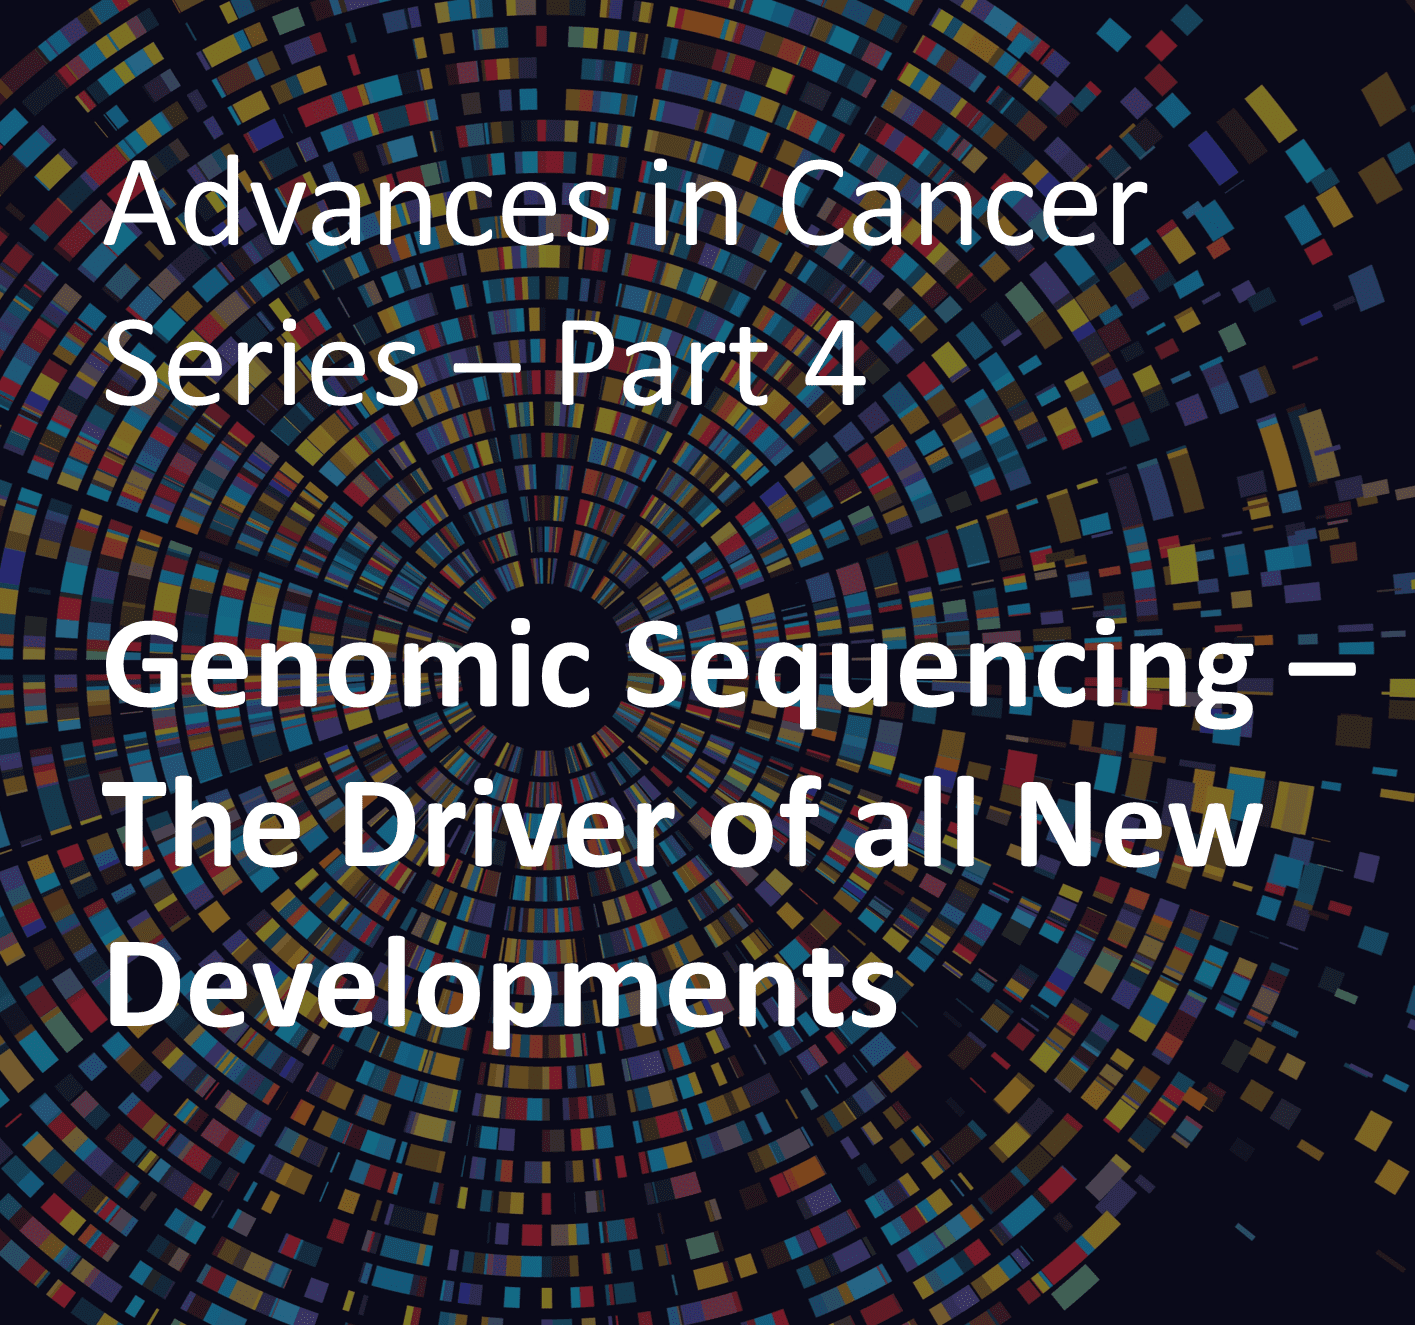 Genomic Sequencing of Tumours - Driving all New Developments in Cancer Medicine